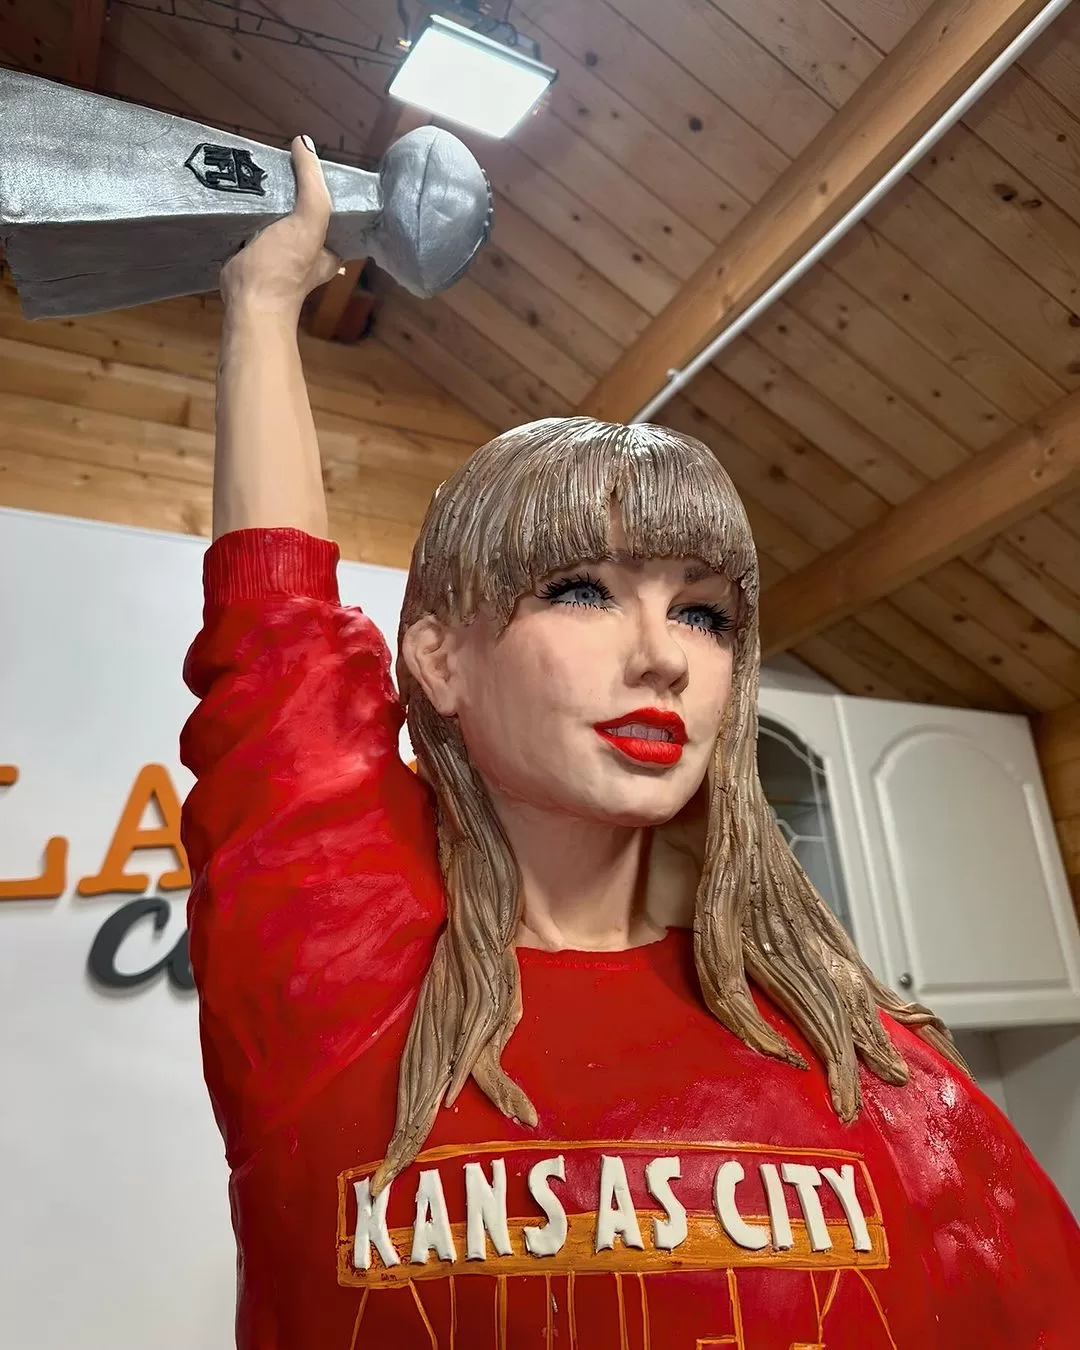 Life-Size Taylor Swift Cake Takes Social Media by Storm Ahead of Super Bowl LVIII, Crafted by UK Baker